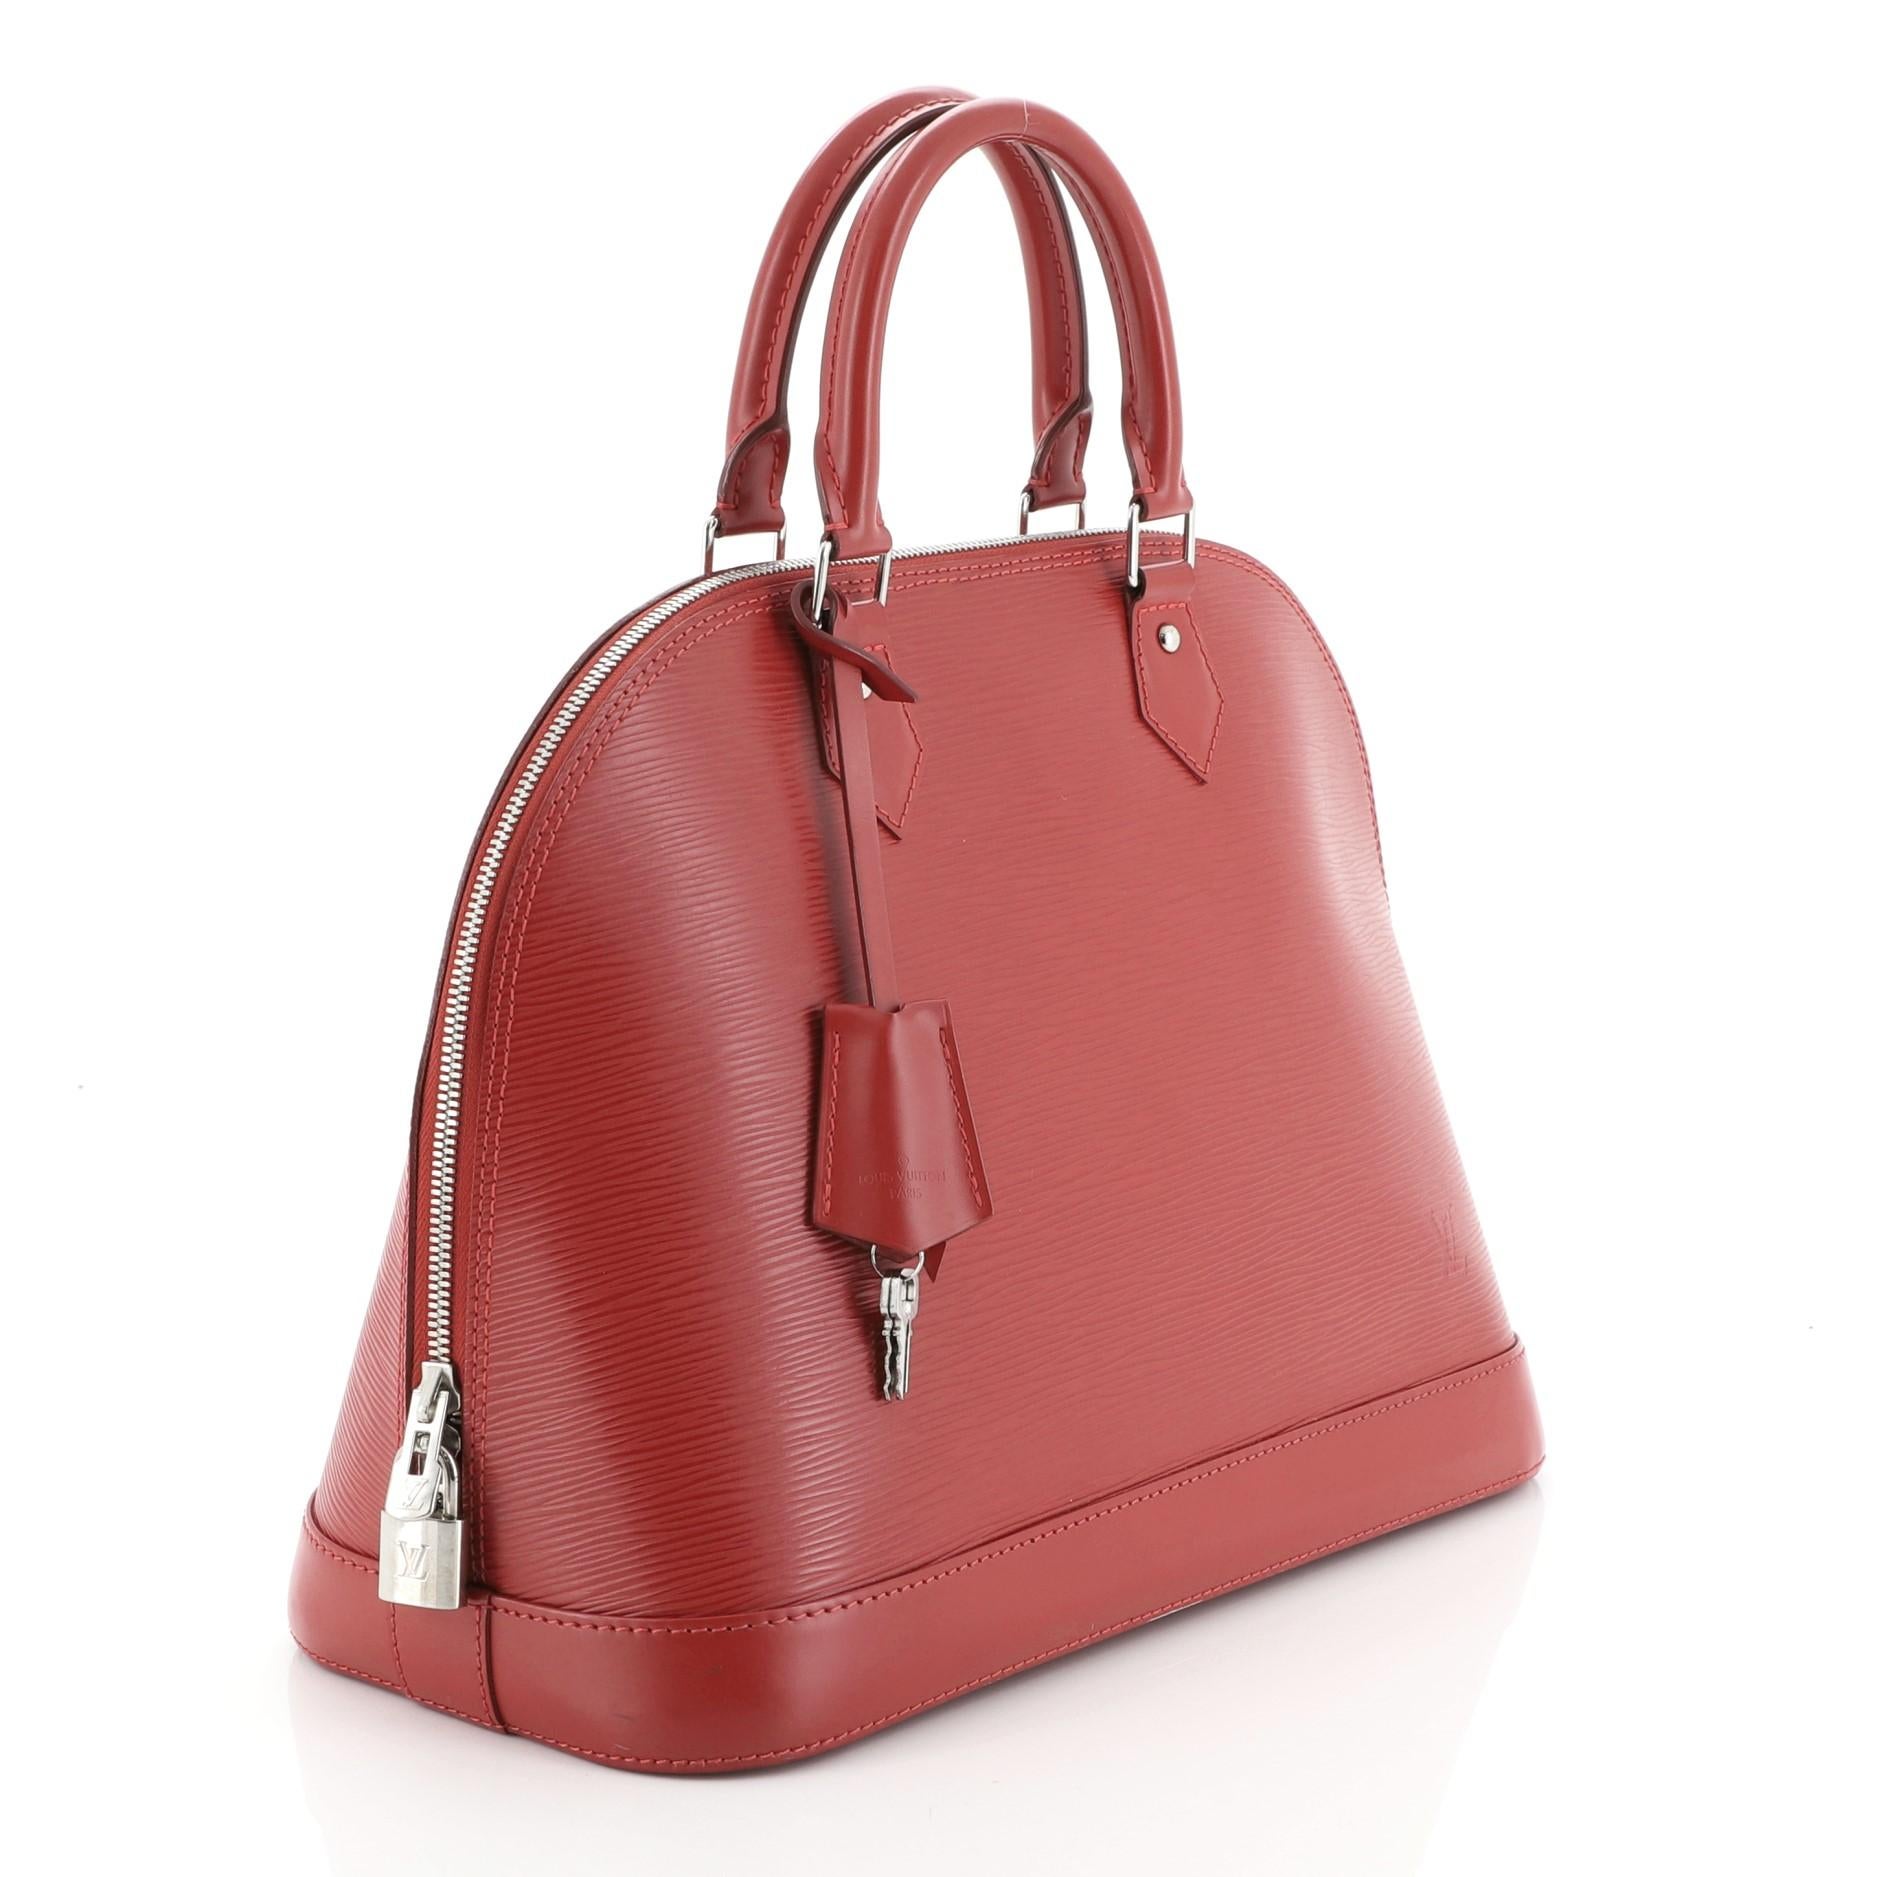 This Louis Vuitton Alma Handbag Epi Leather MM, crafted in red epi leather, features dual-rolled handles, protective base studs, and silver-tone hardware. Its all-around zip closure opens to a red microfiber interior with slip pockets. Authenticity